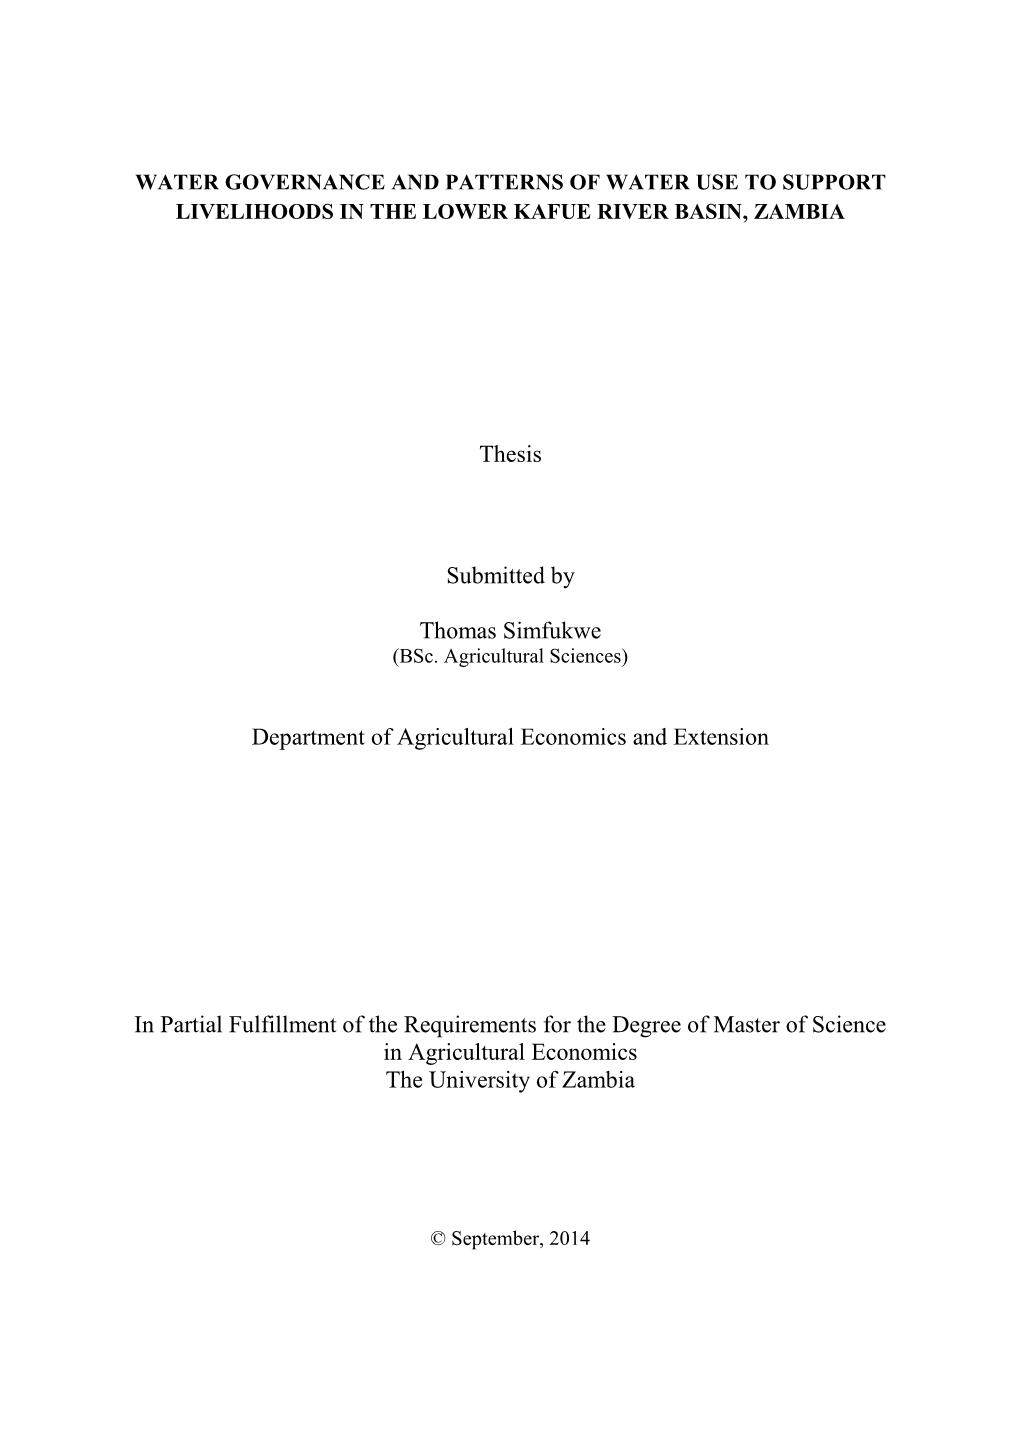 Thesis Submitted by Thomas Simfukwe